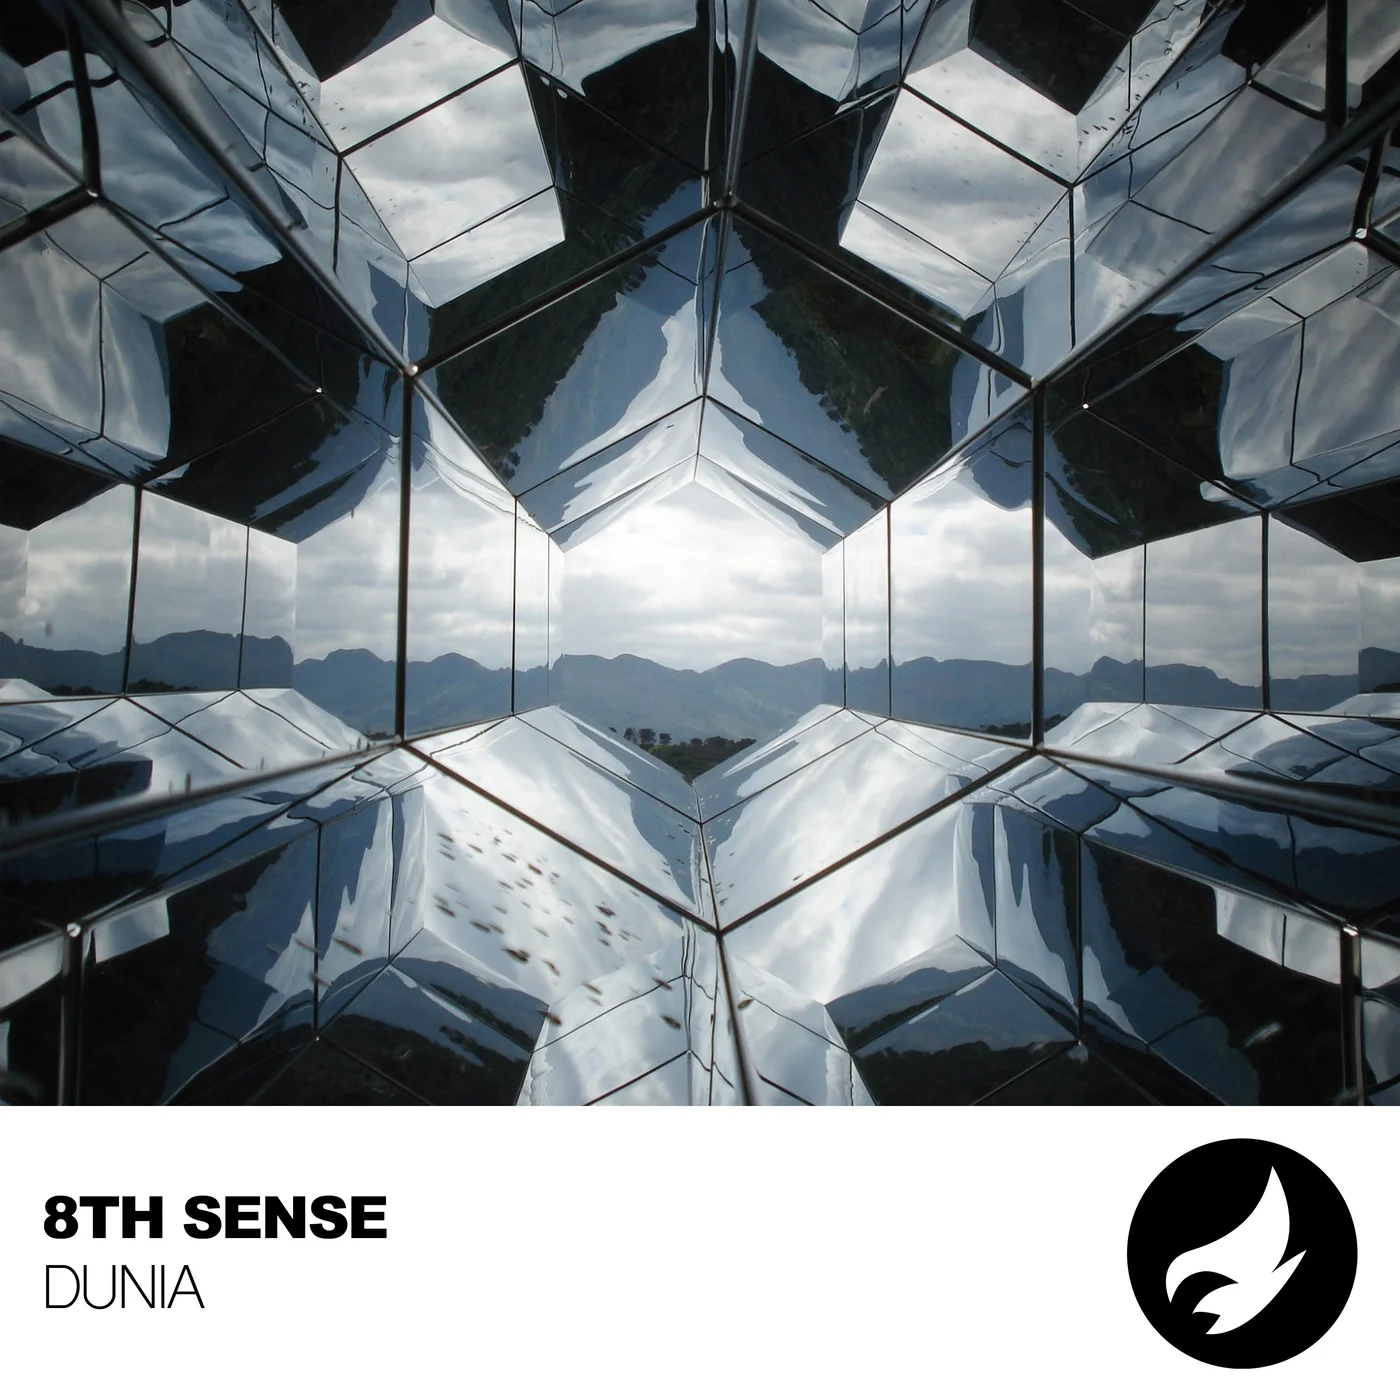 Experience the Mesmerizing Soundscape of ‘Dunia’ by 8th Sense